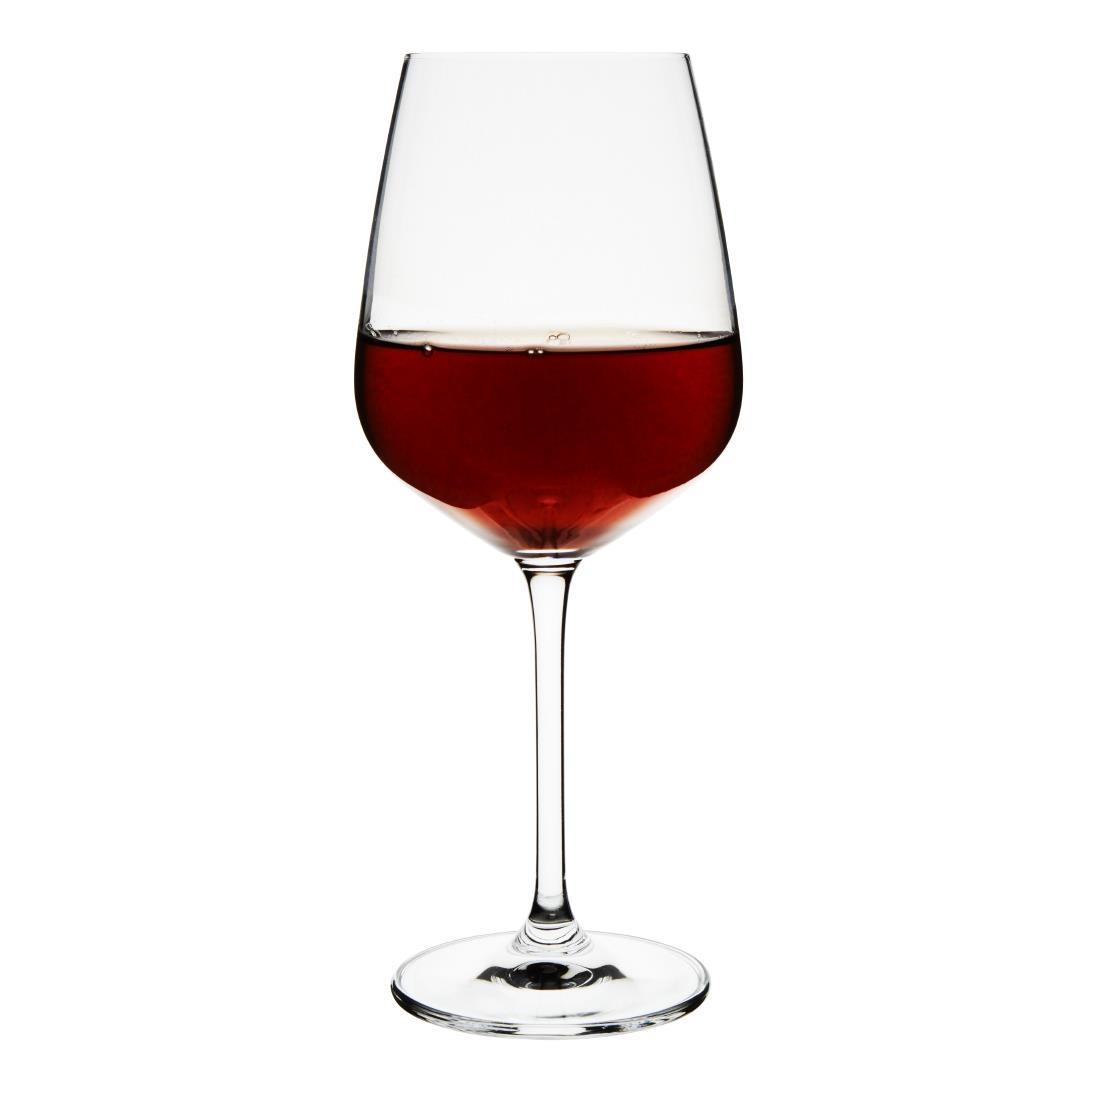 Olympia Chime Crystal Wine Glasses 495ml (Pack of 6) - GF734  - 3